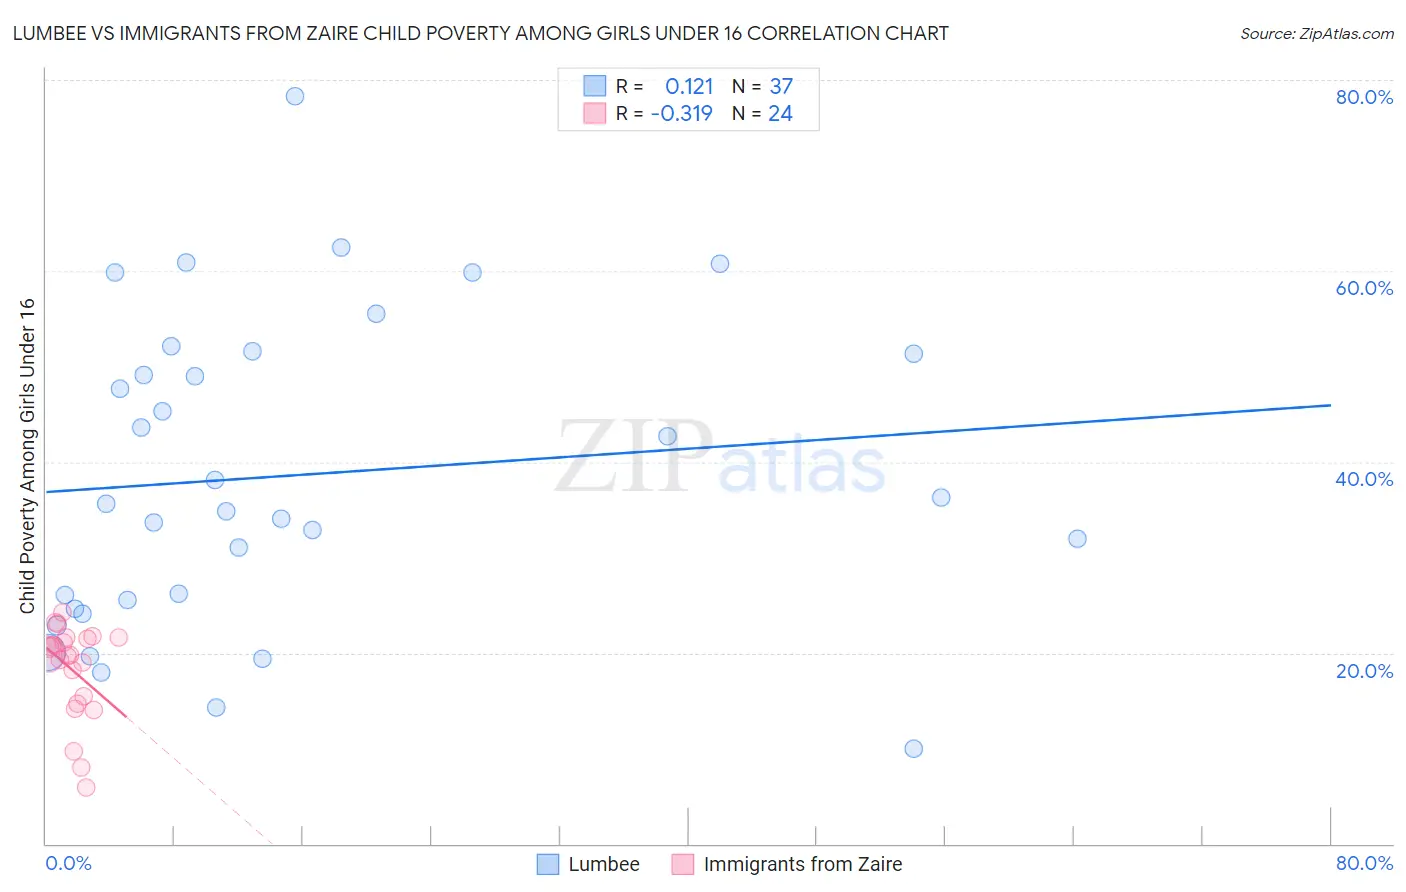 Lumbee vs Immigrants from Zaire Child Poverty Among Girls Under 16